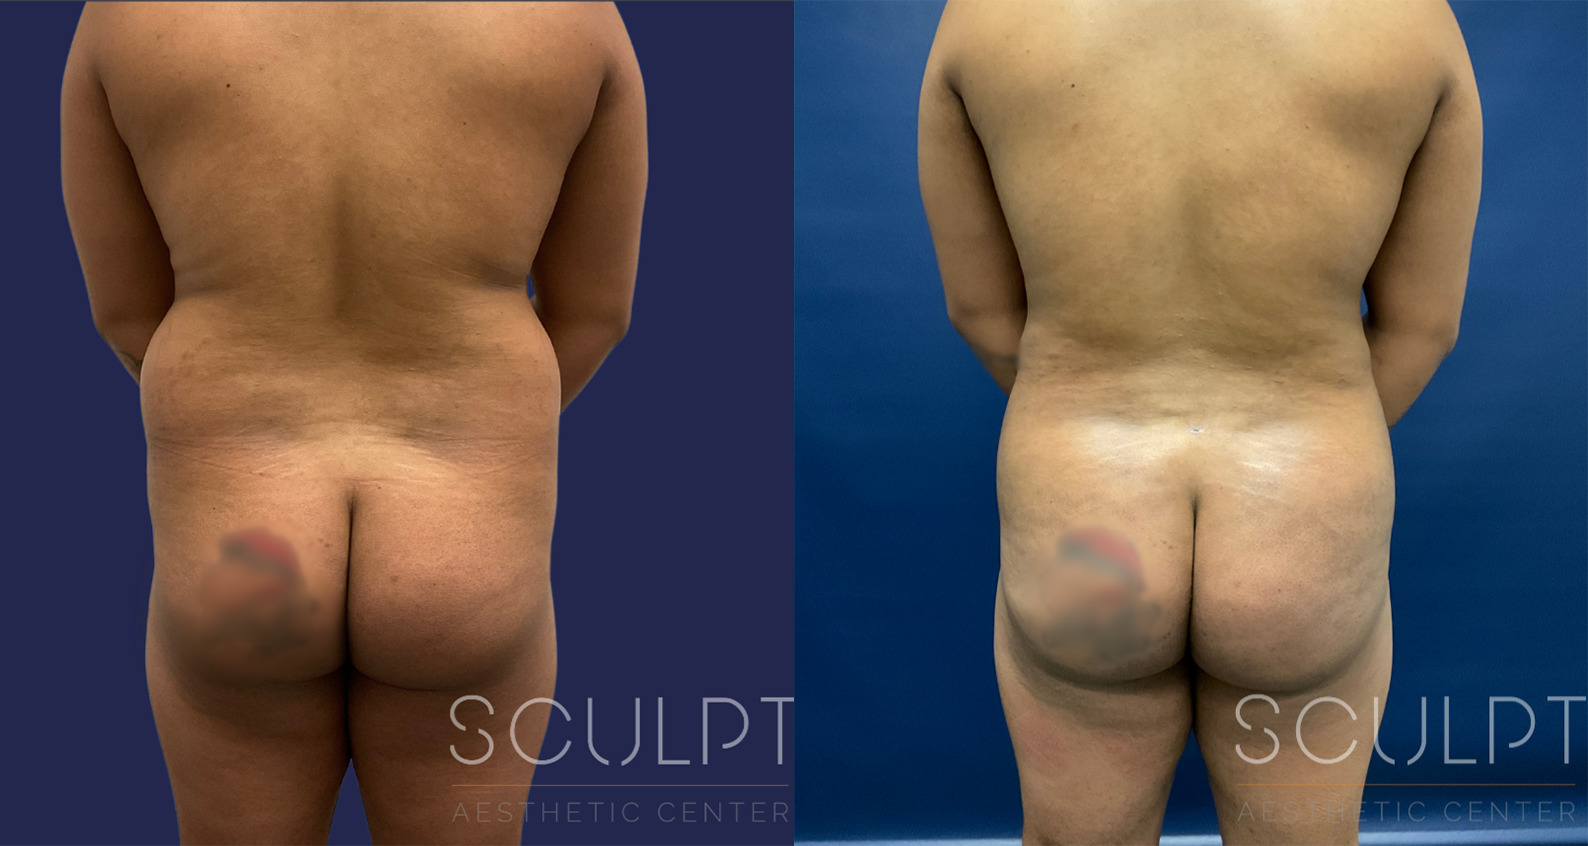 Male Gluteal (Buttock) Augmentation Before and After Photo by Sculpt Aesthetic Center in Frisco, TX